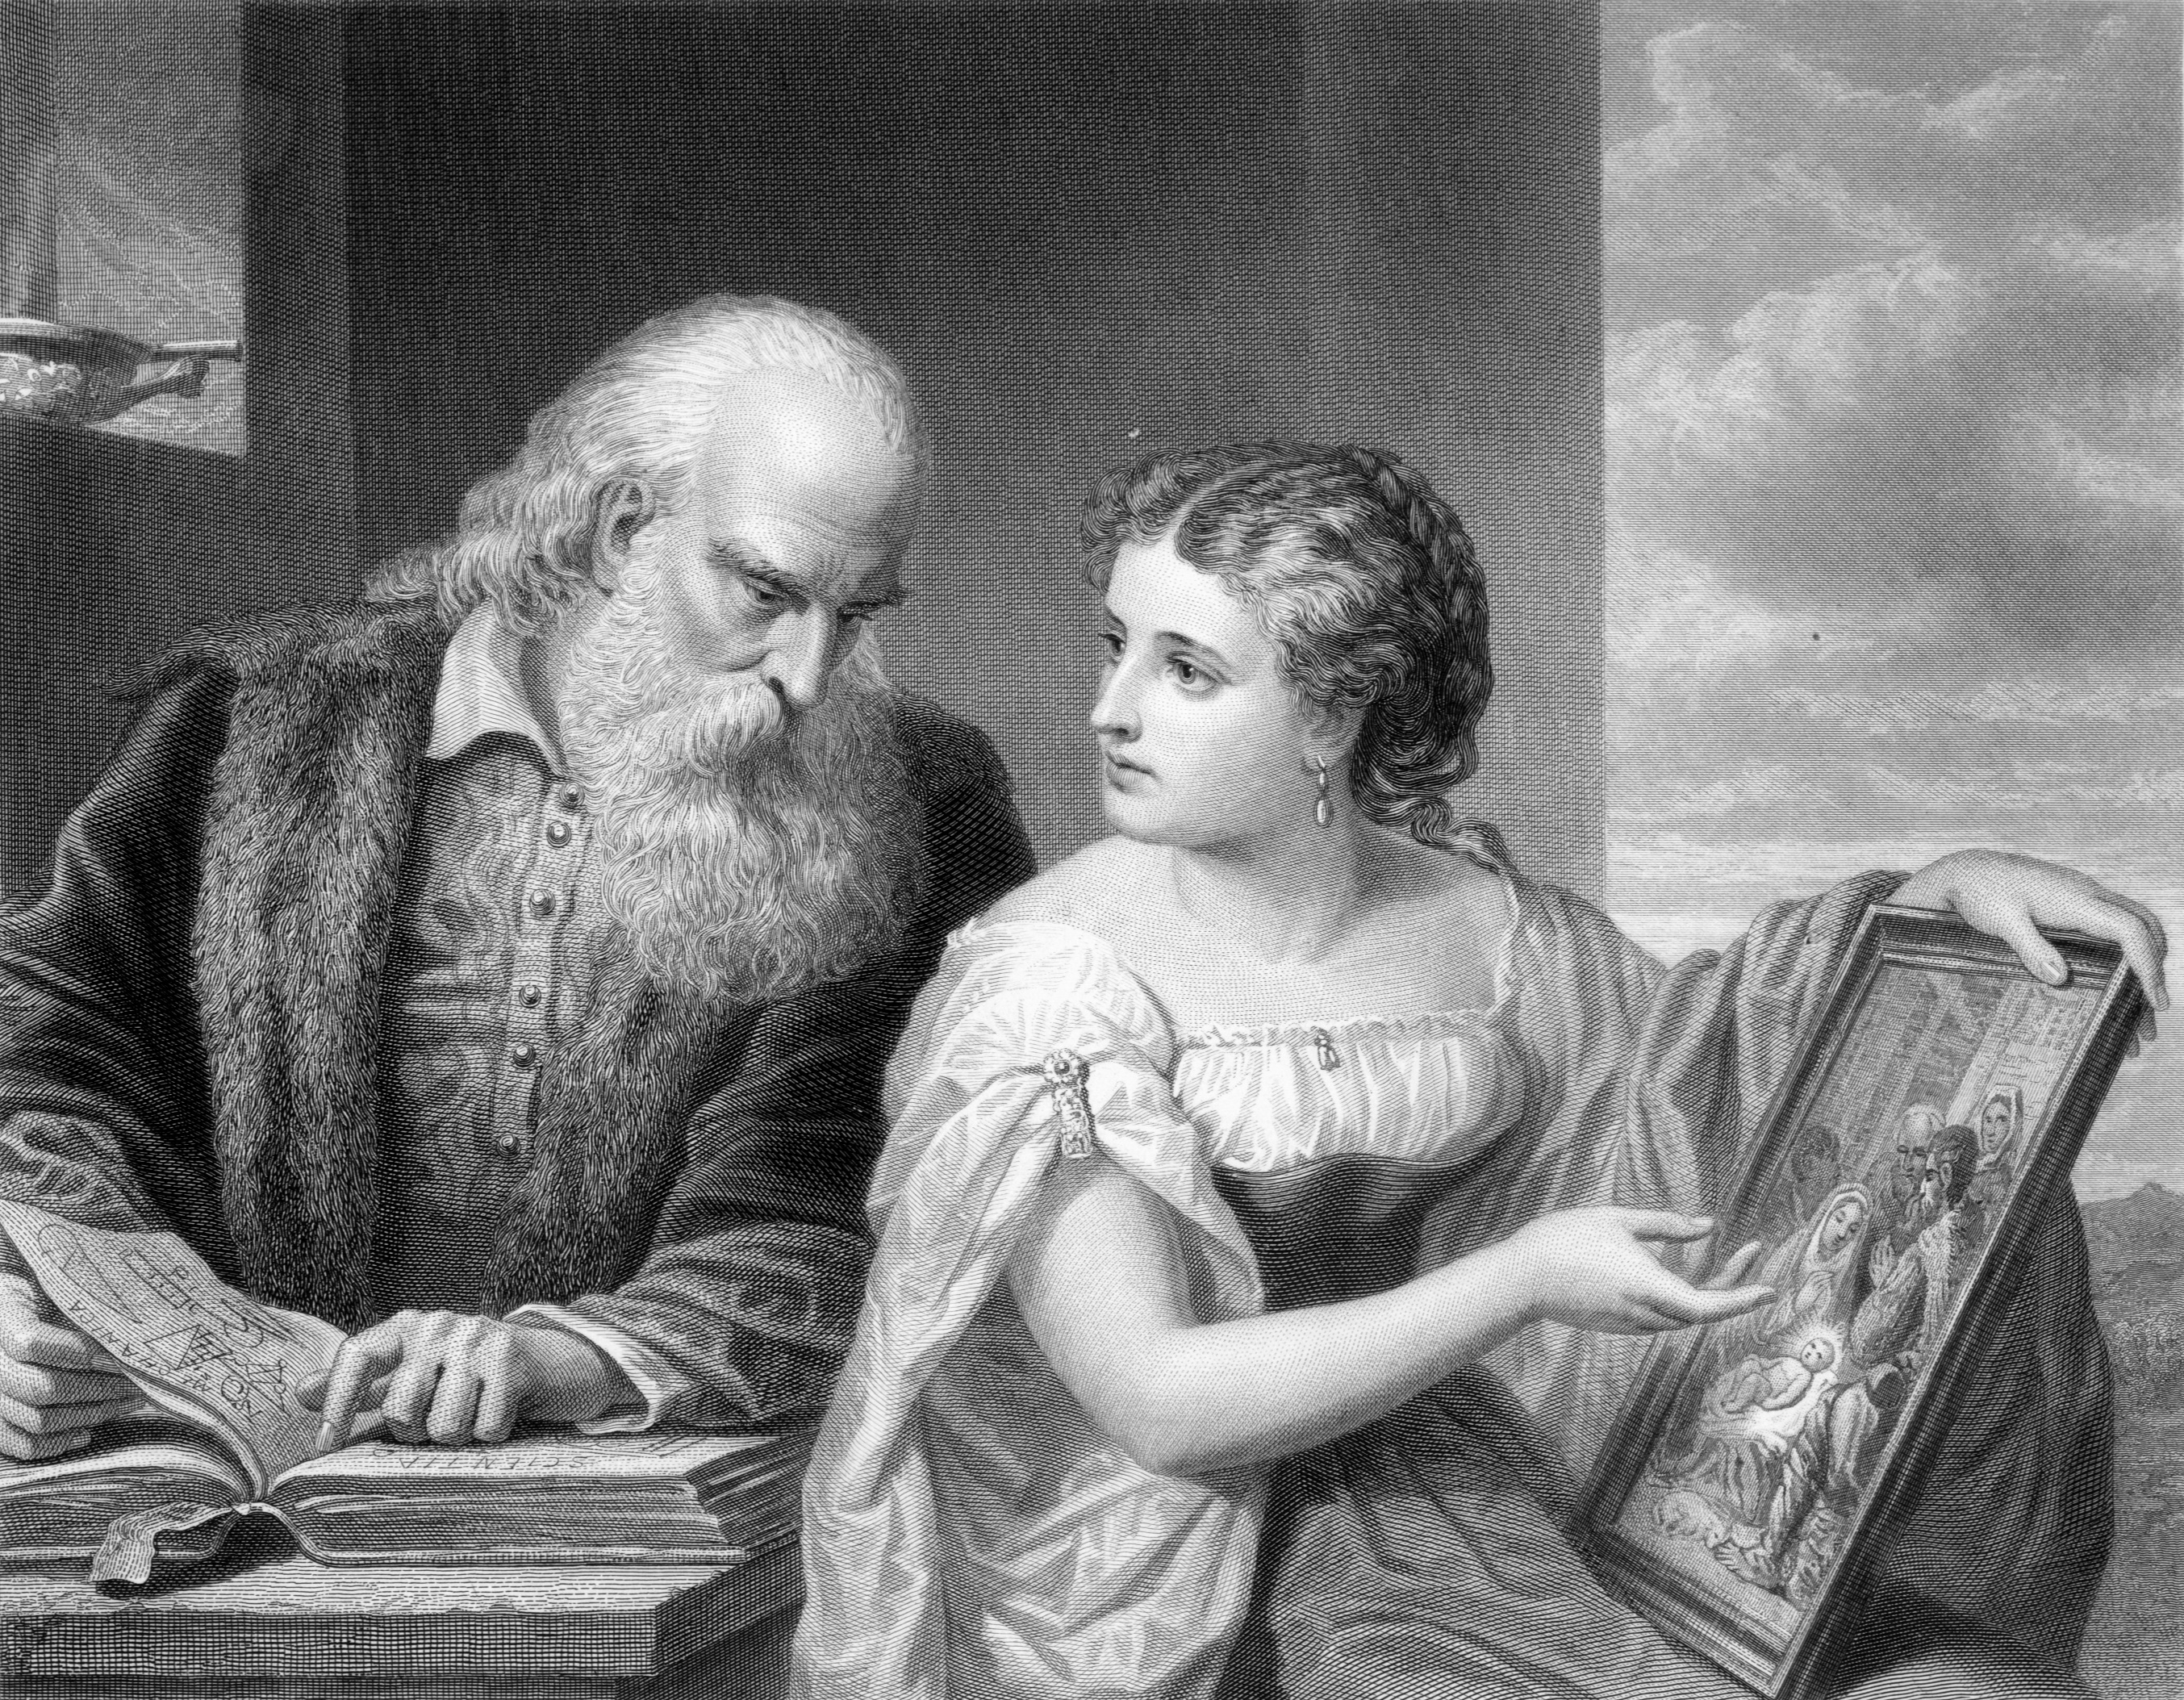 Engraving depicting a young woman representing religion debating with an old man representing science.